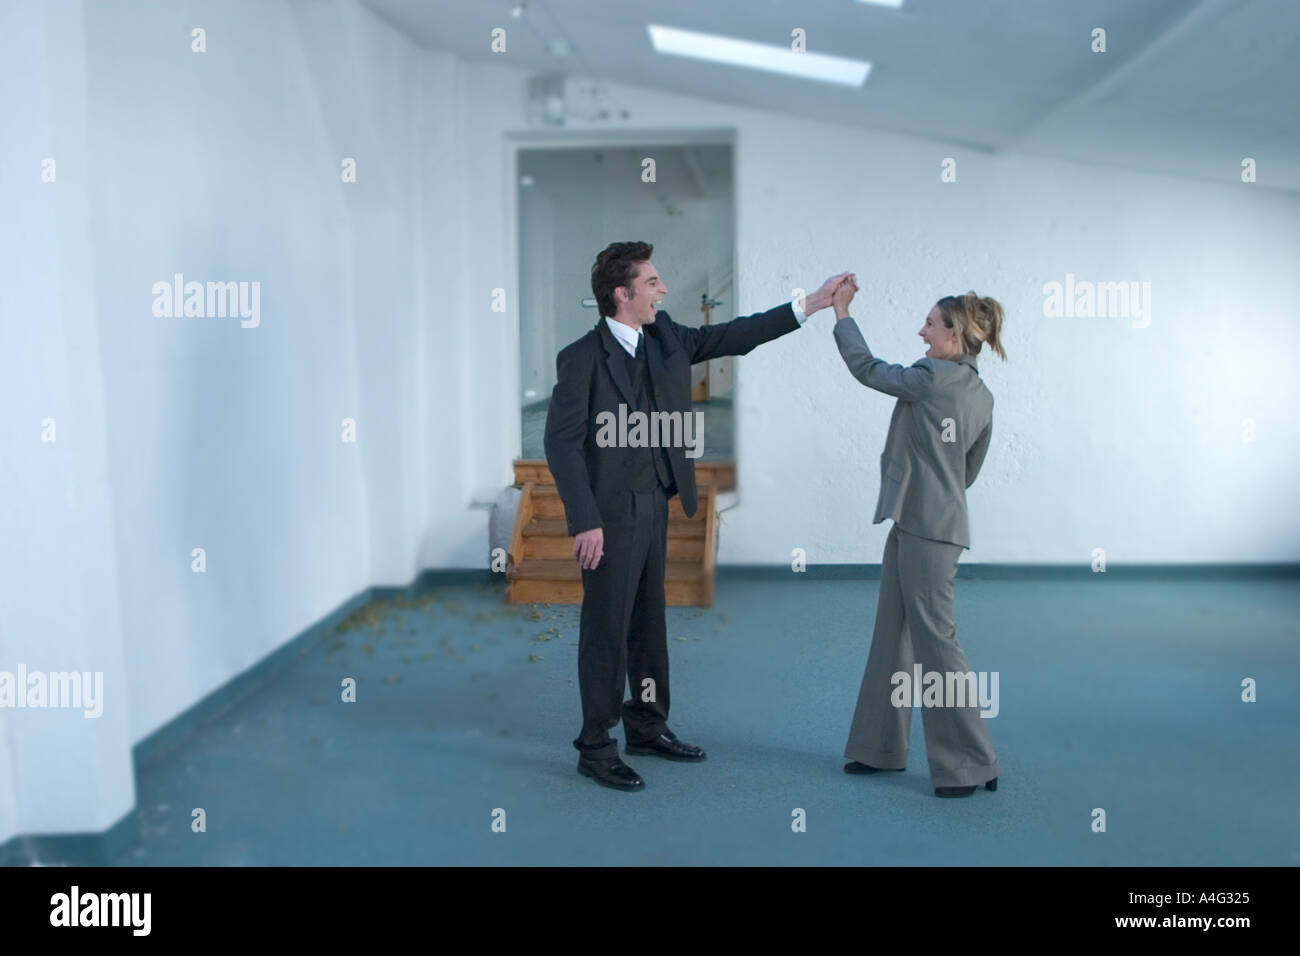 MR Man and woman in business dress cheer in an empty loft Stock Photo